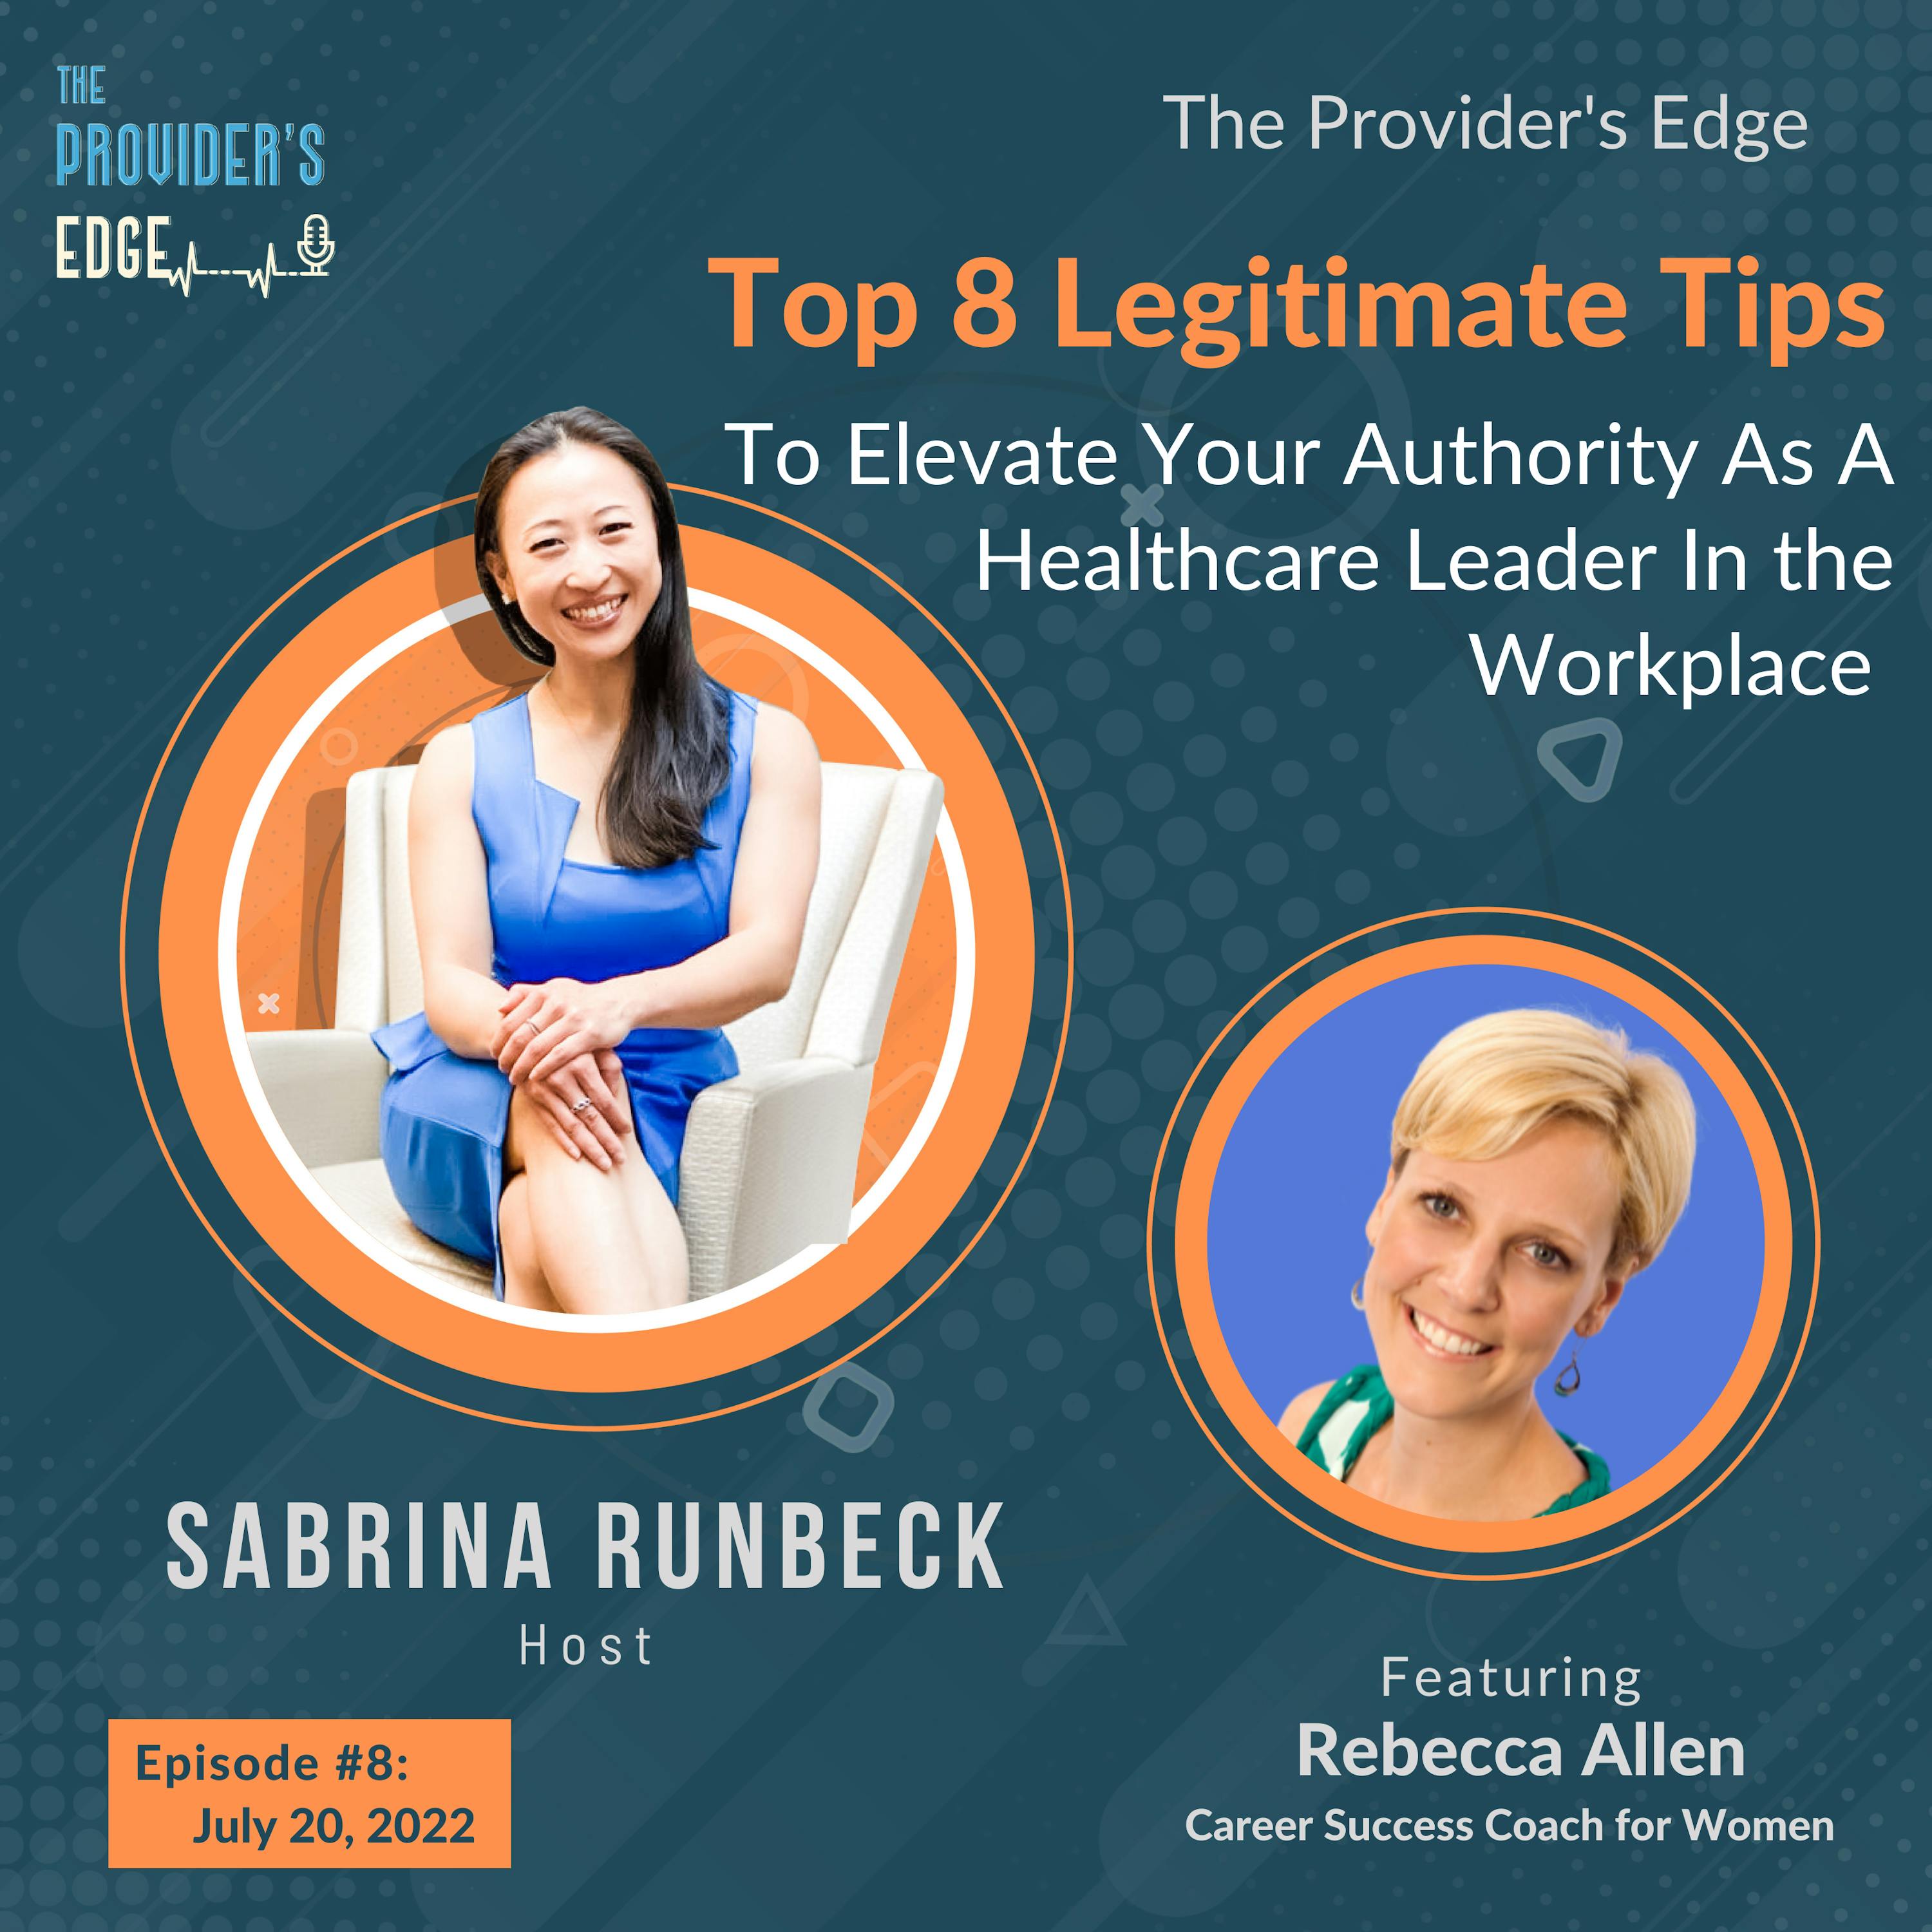 Top 8 Legitimate Tips To Elevate Your Authority As A Healthcare Leader In the Workplace with Rebecca Allen Ep 8